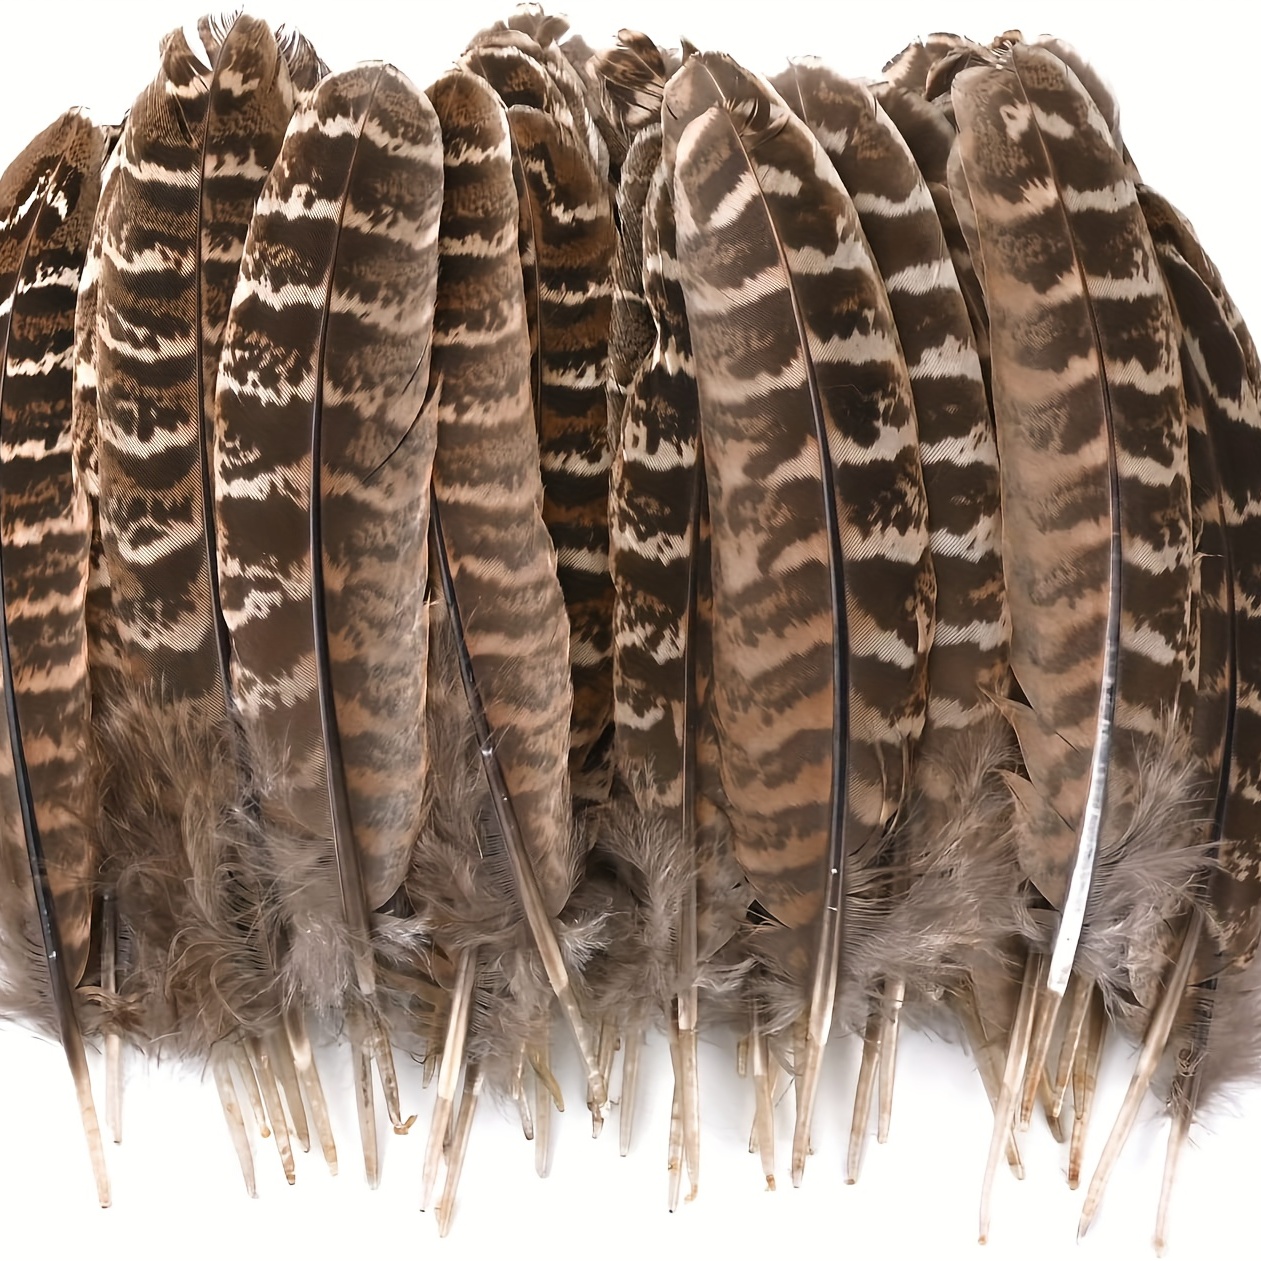 50pcs Feather For Crafts Natural Pheasant Feathers DIY Pheasant Tails  Feather Brown Feathers Natural Speckled Feathers For DIY Dream Catcher  Crafts,Ha